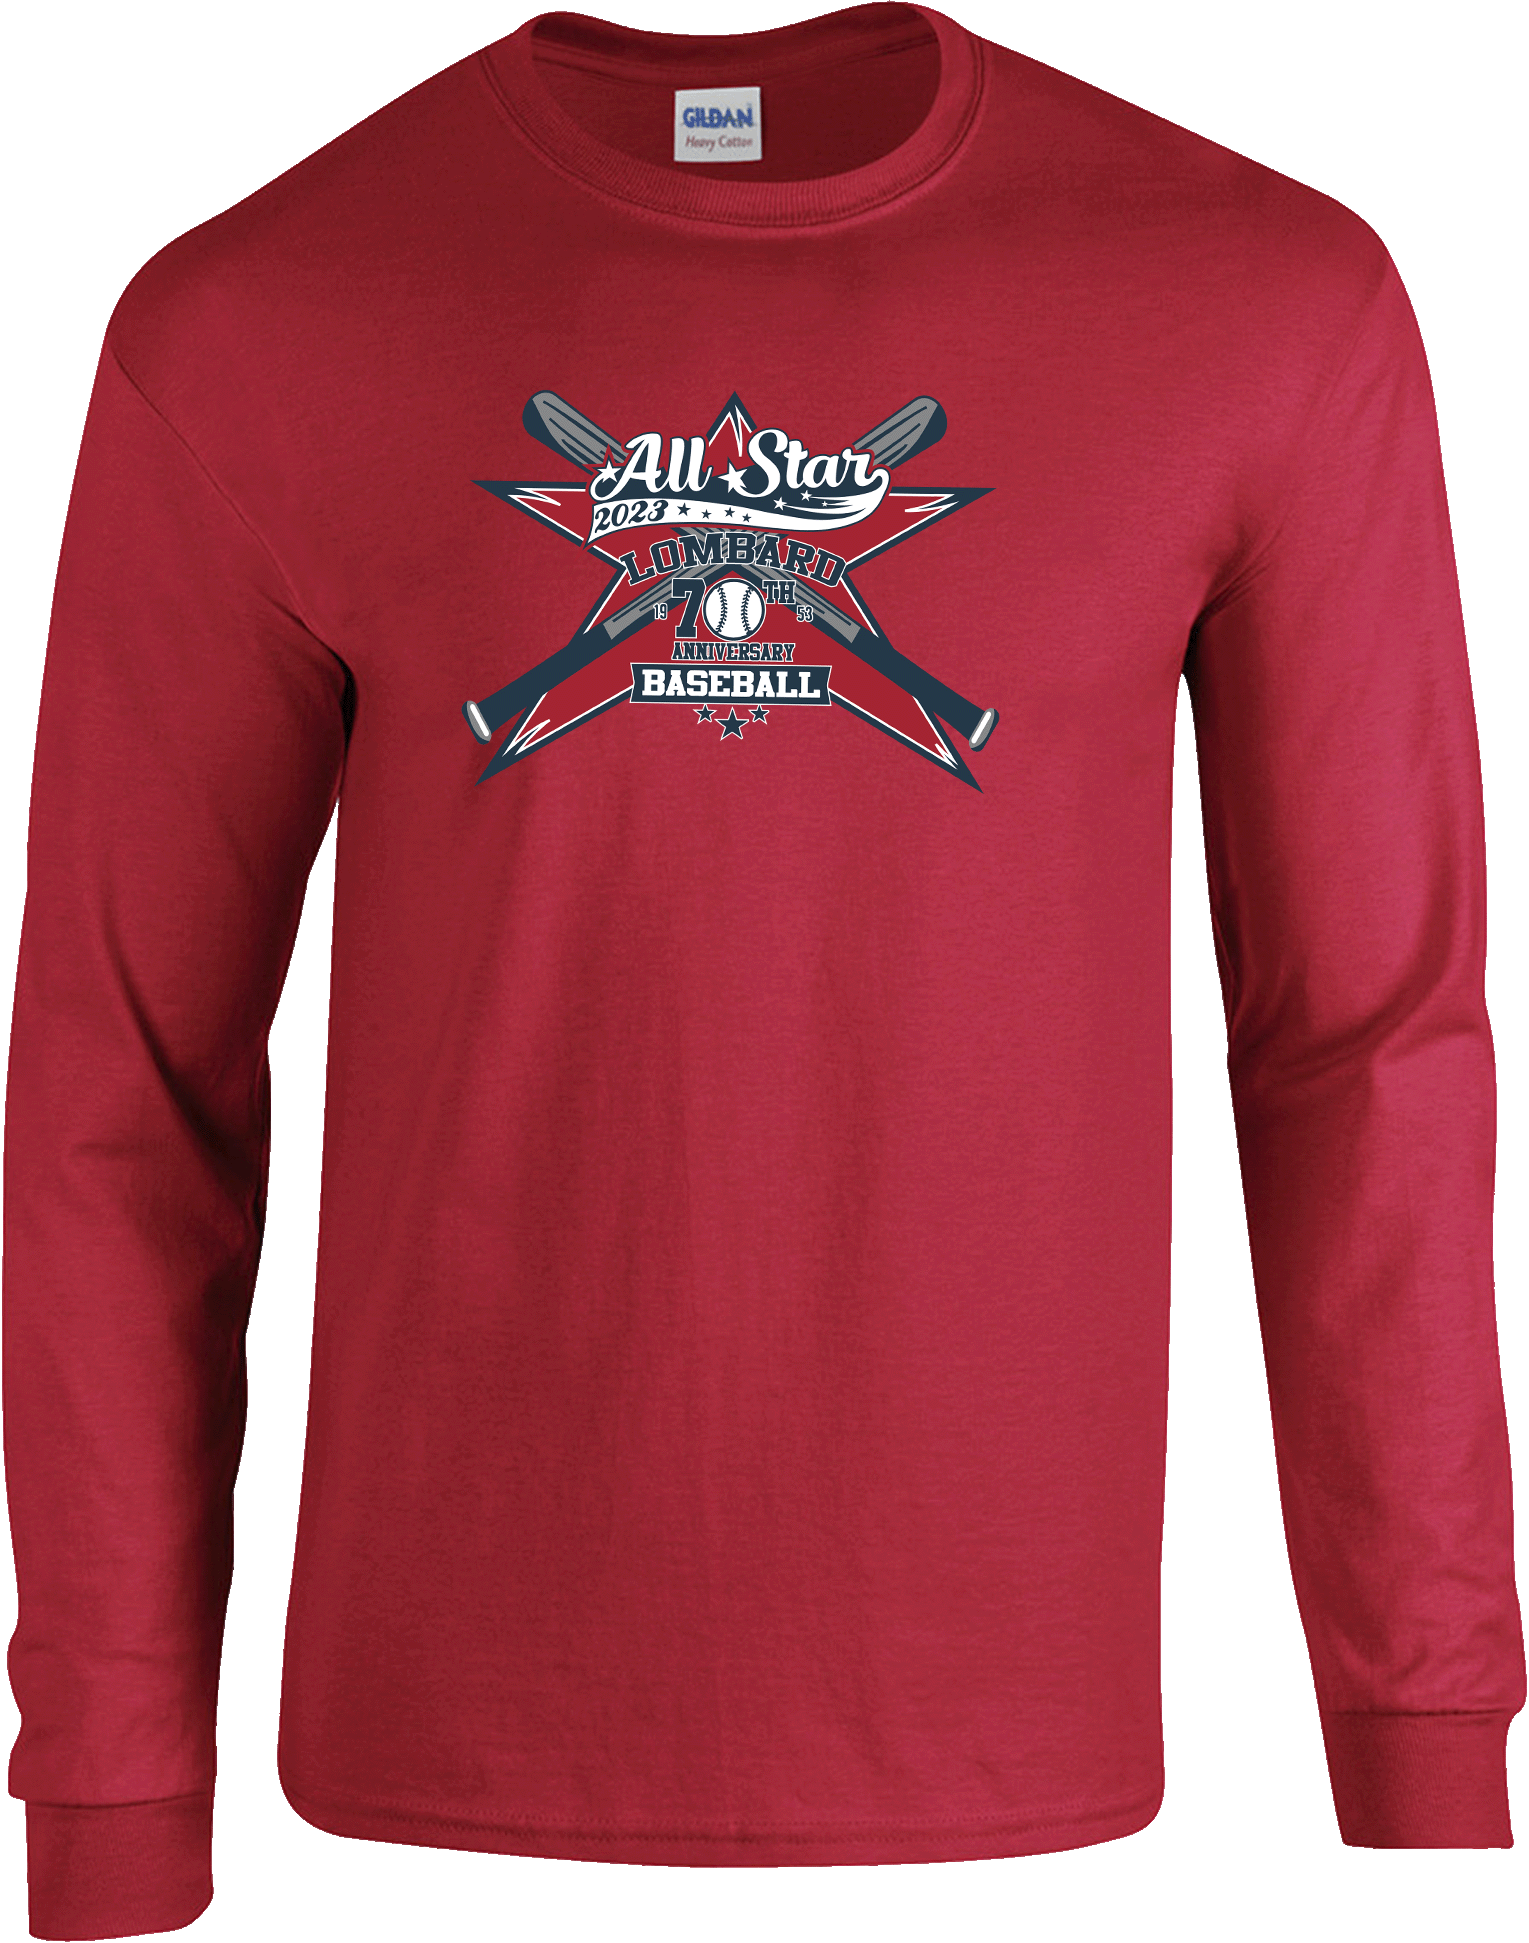 LONG SLEEVES - 2023 Lombard Baseball League's 70th Anniversary All Star Event